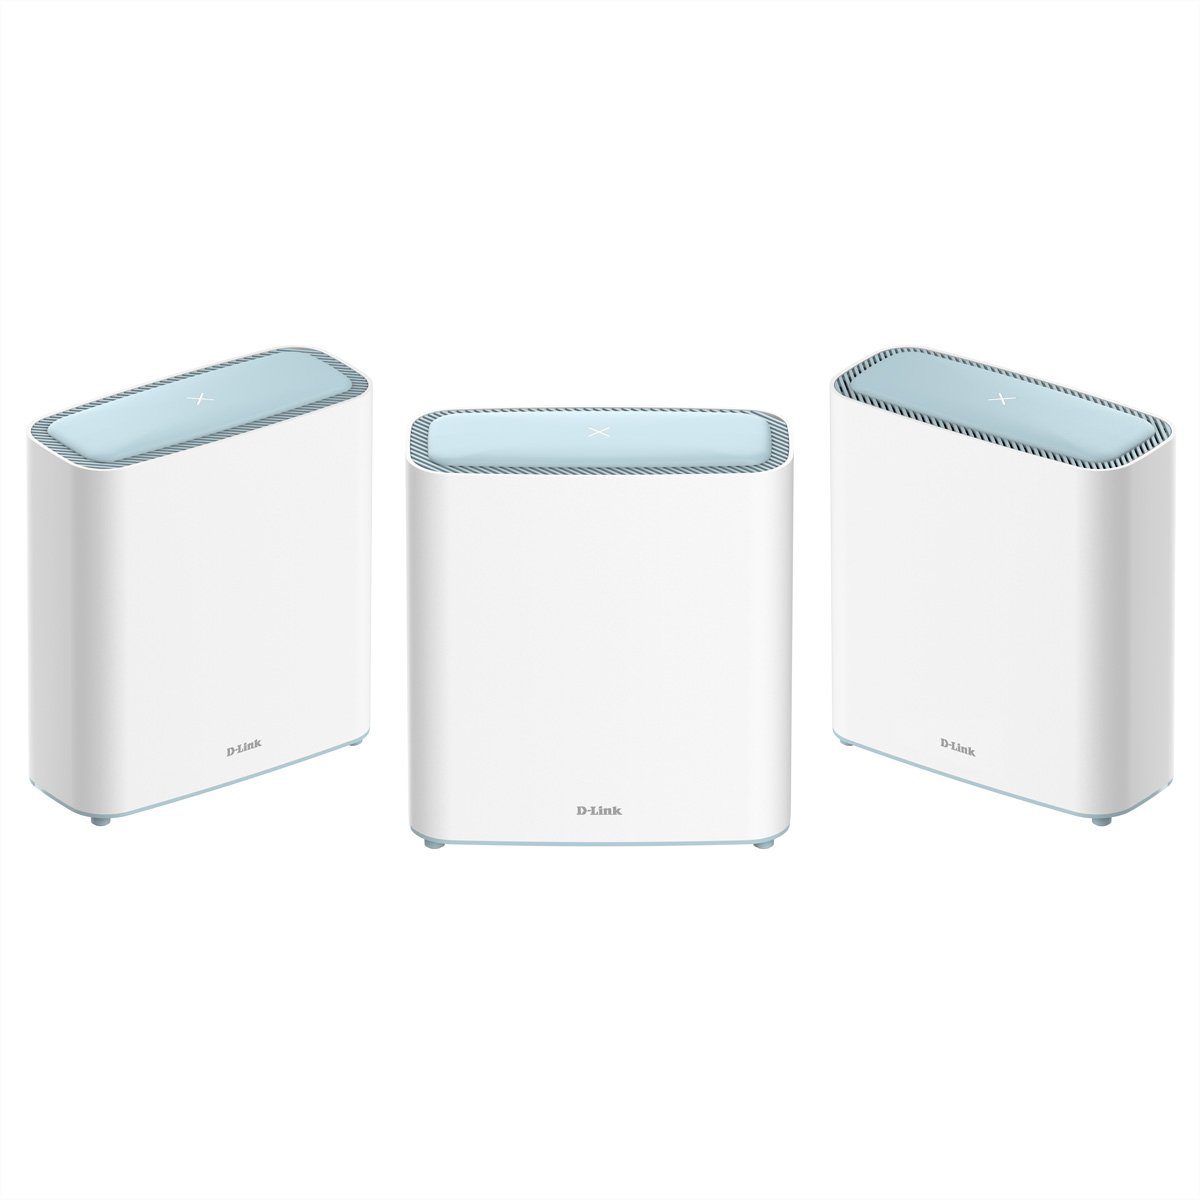 D-Link M32-3 EaglePro Mesh System, 3-Pack WLAN-Repeater, AI, AX3200, WiFi 6, MU-MIMO